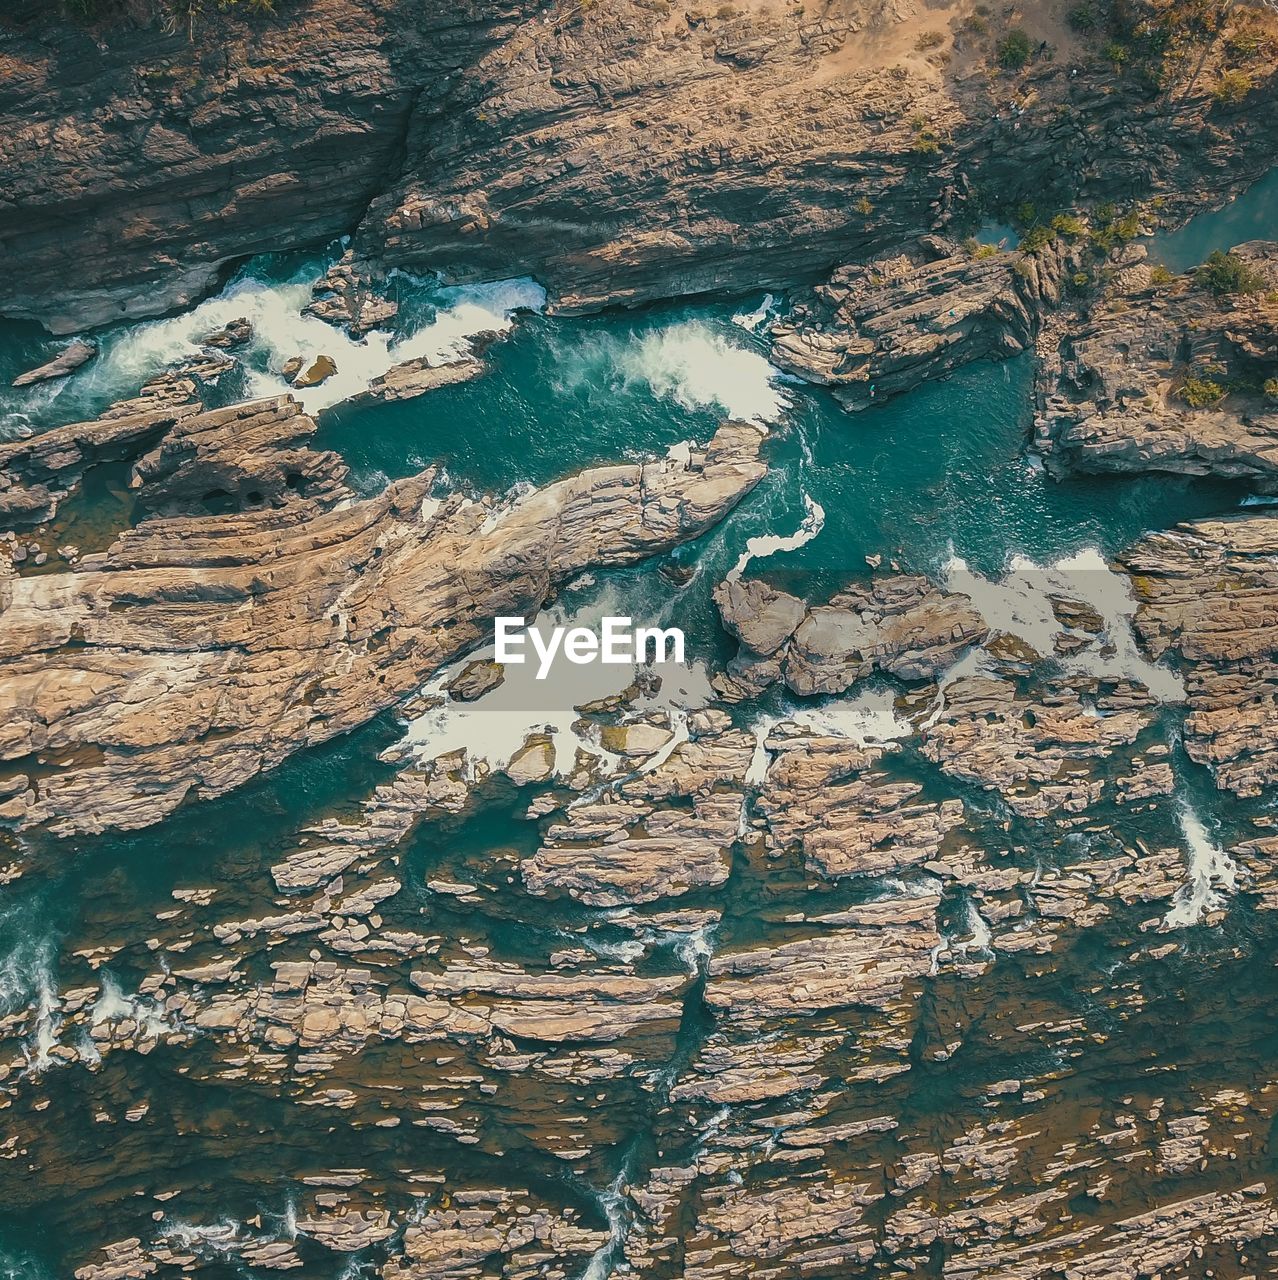 FULL FRAME SHOT OF ROCK FORMATION IN WATER